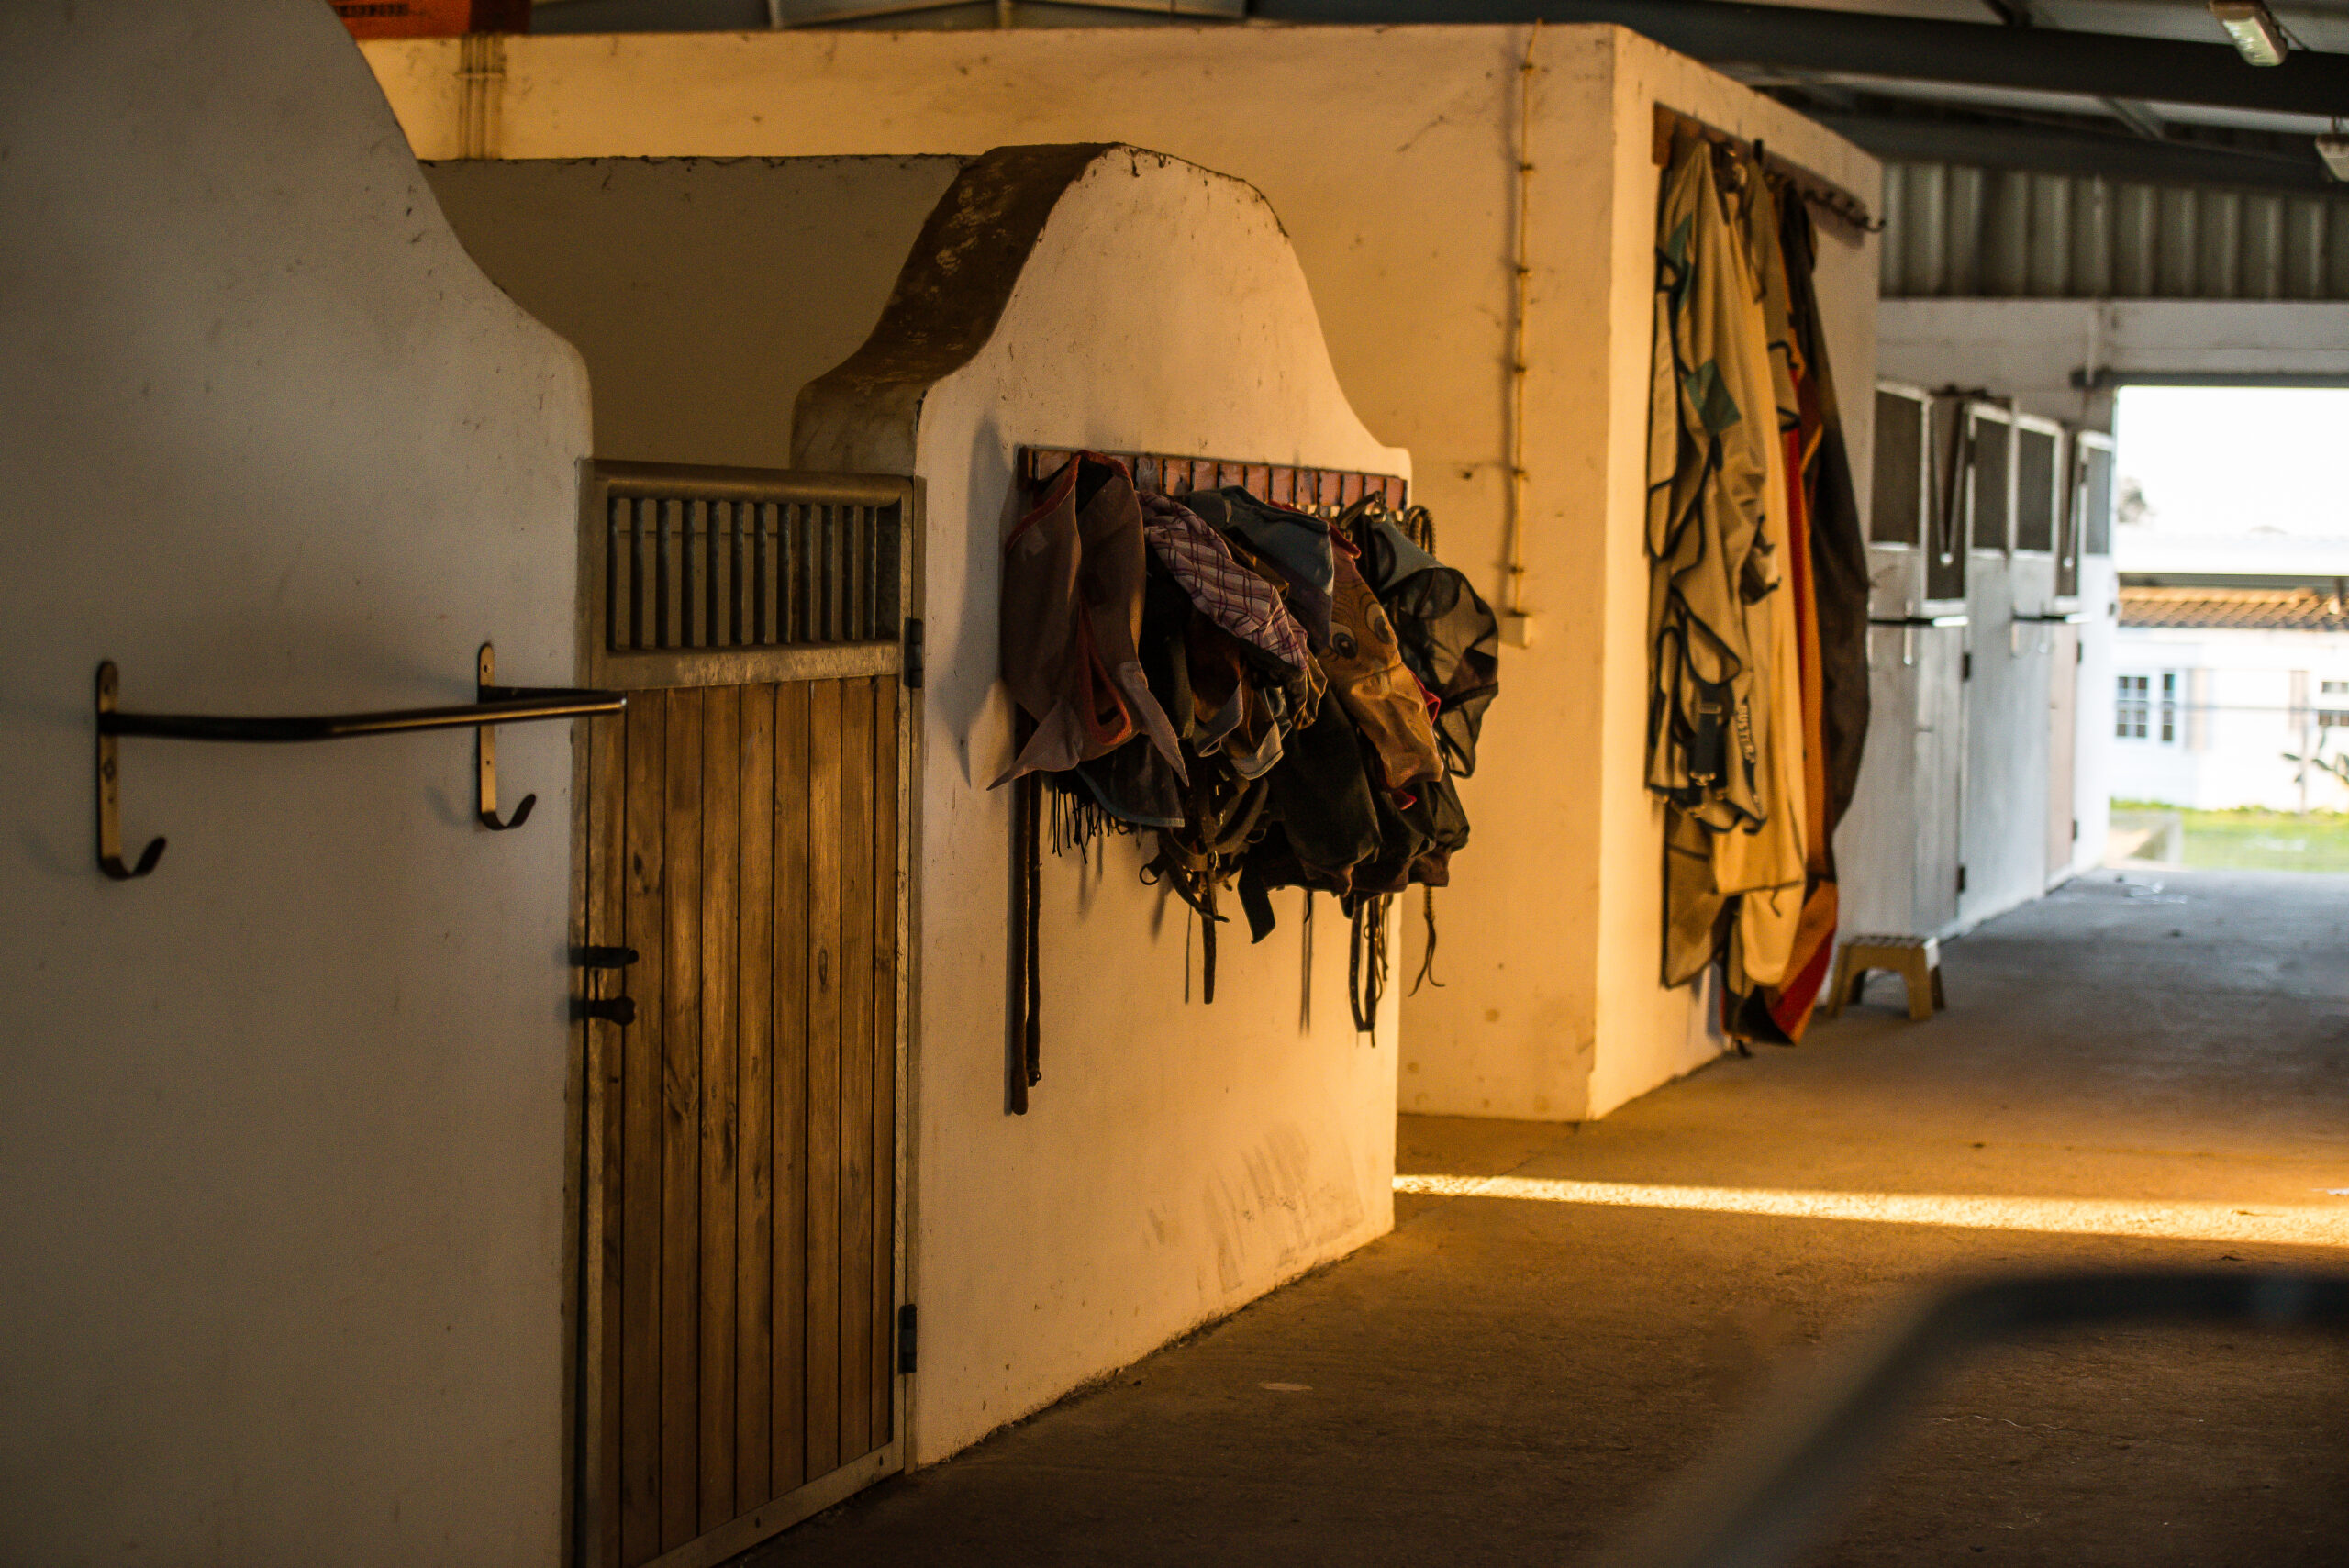 View into the stable aisle to a box on the left side with halters hanging on the wall